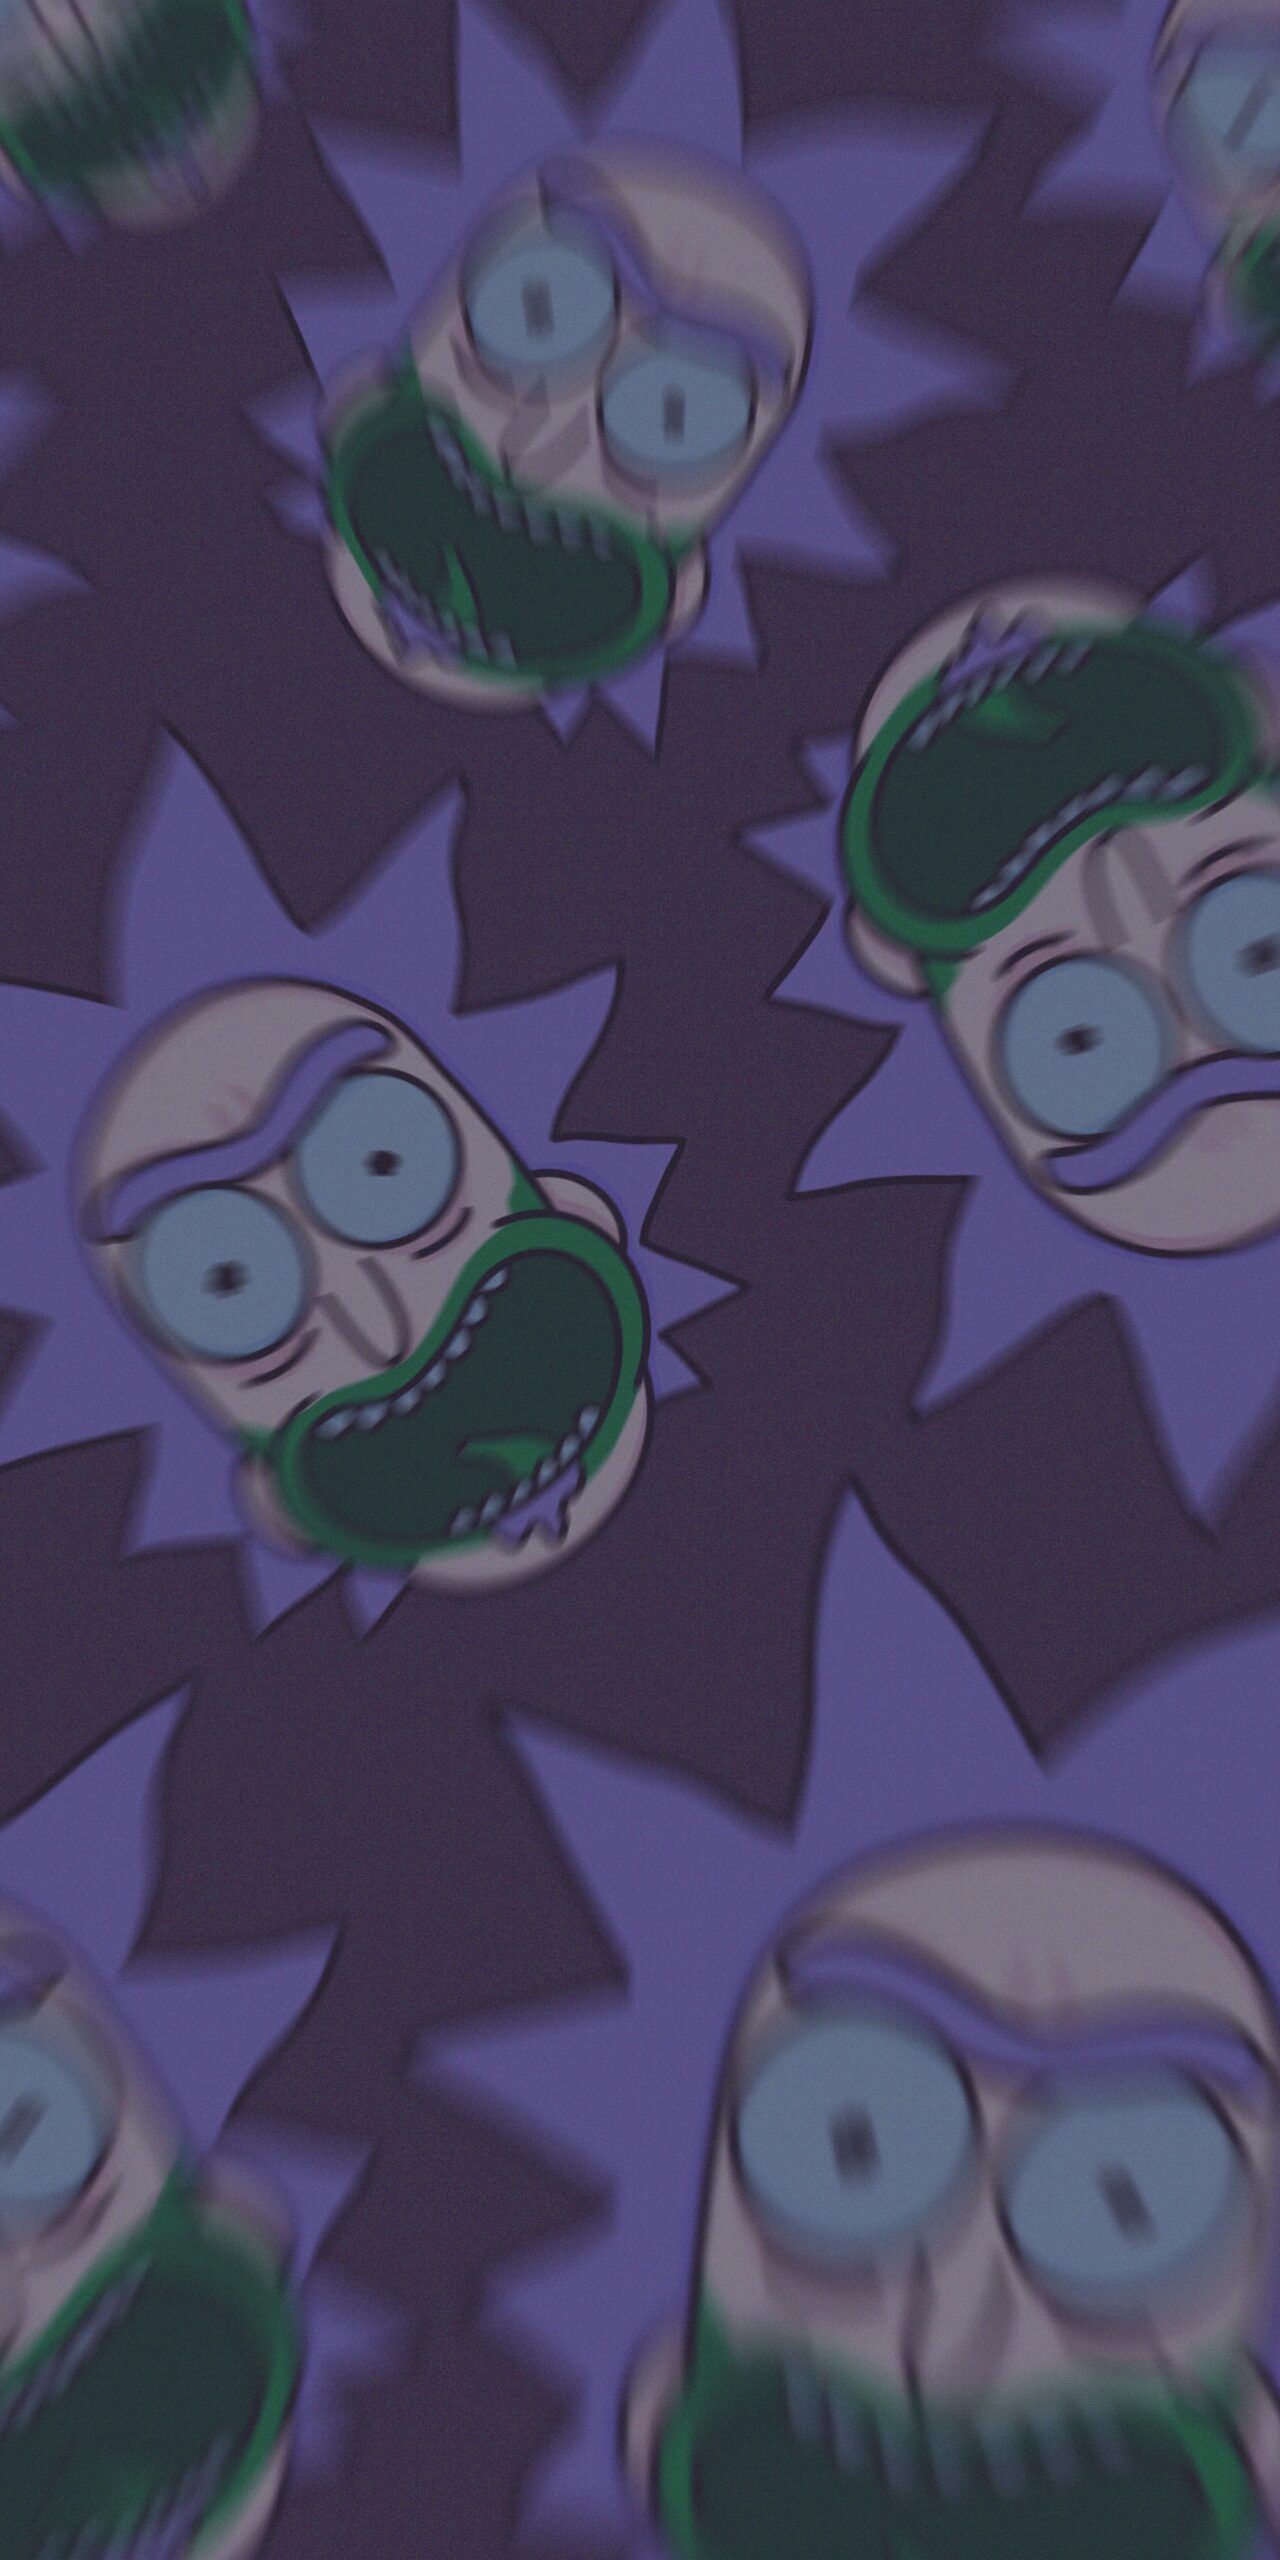 A close up of rick and morty - Rick and Morty